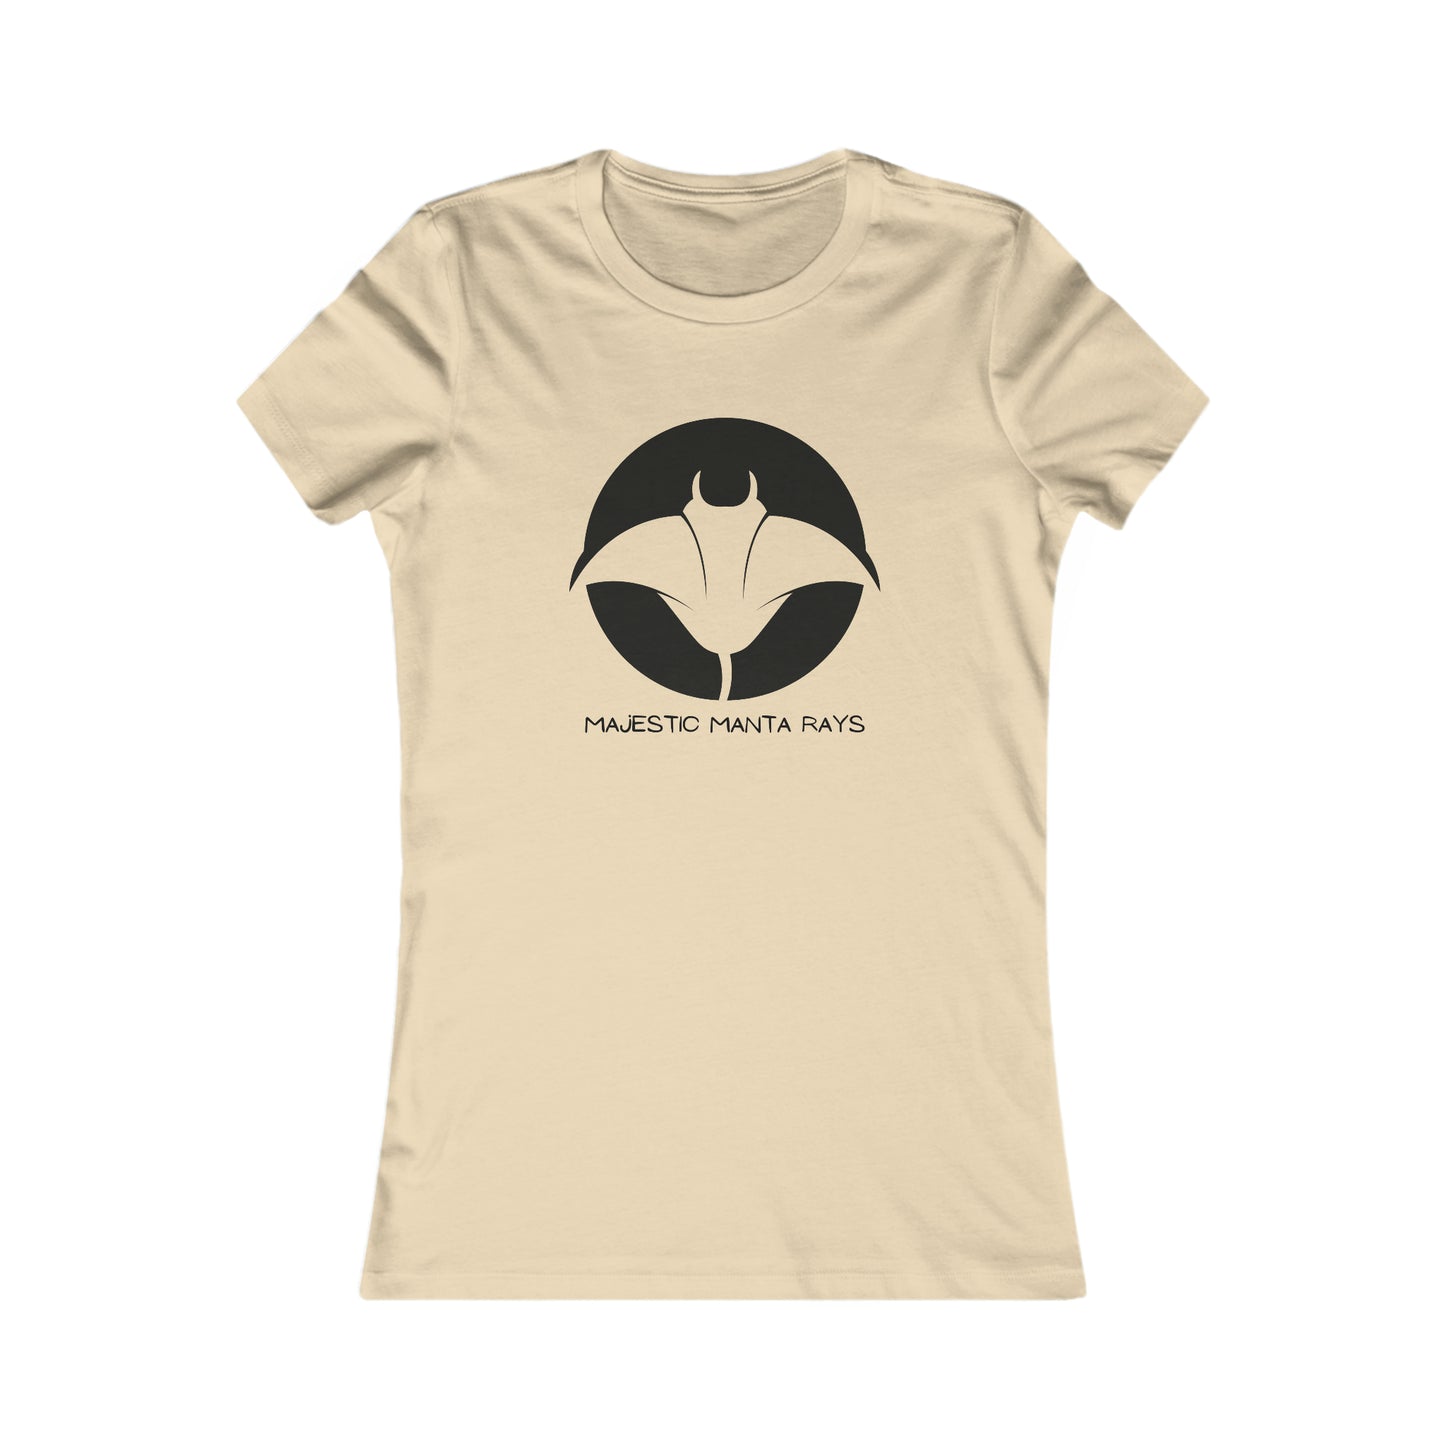 Manta Rays are majestic, graceful and absolutely mesmerizing to watch. This Women's Favorite Tee is designed to celebrate them. Slim fit so please check the size table.